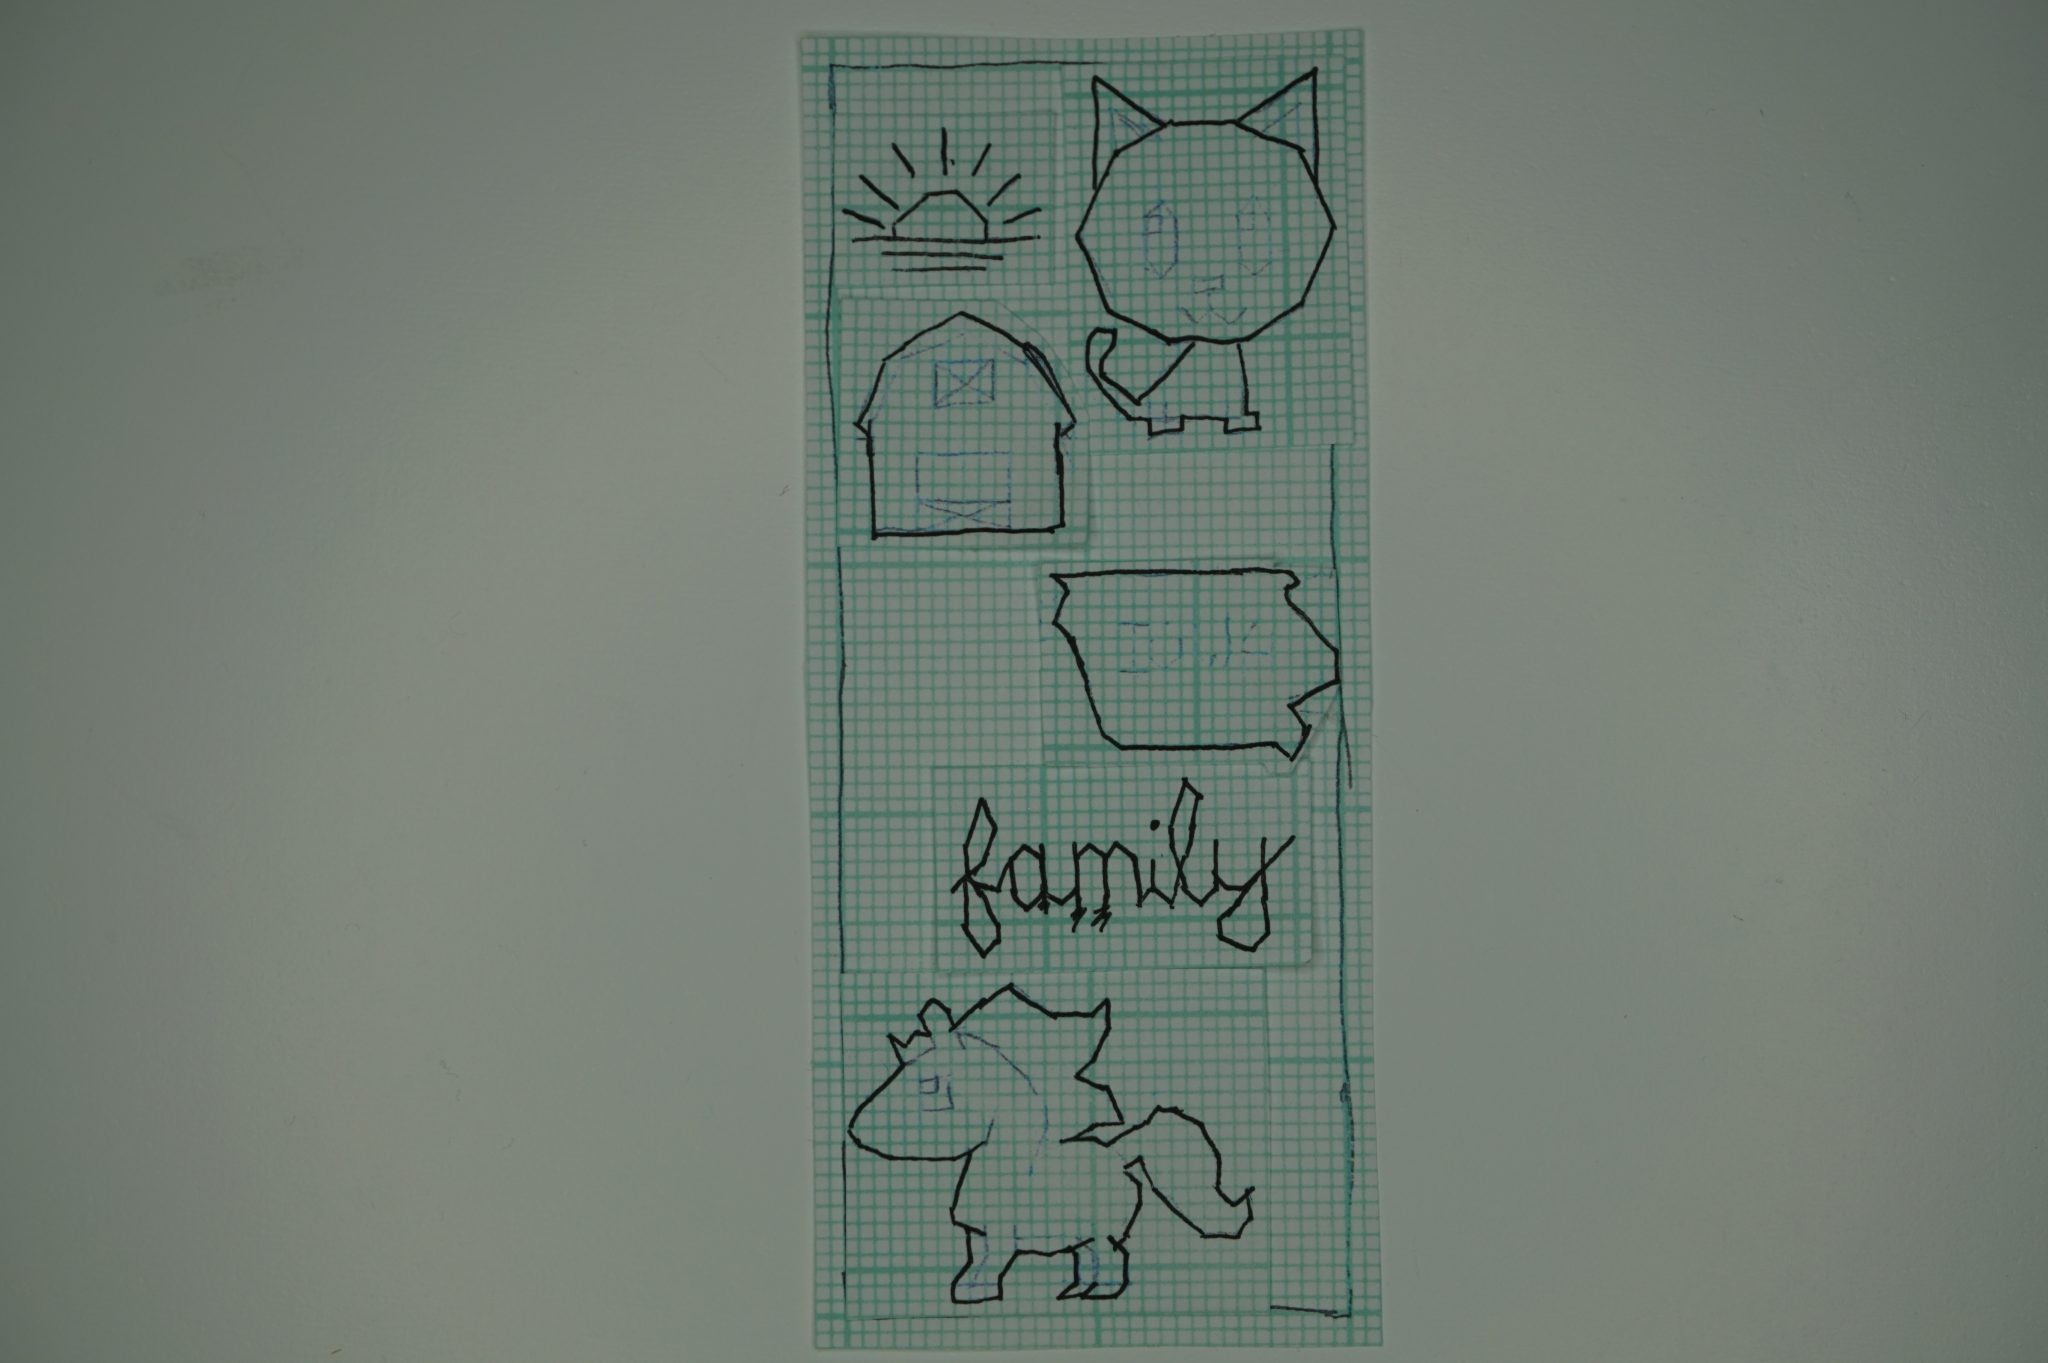 How To Make Your Own Embroidery Pattern Make Your Own Simple Outlines For Embroiderycross Stitch Thread